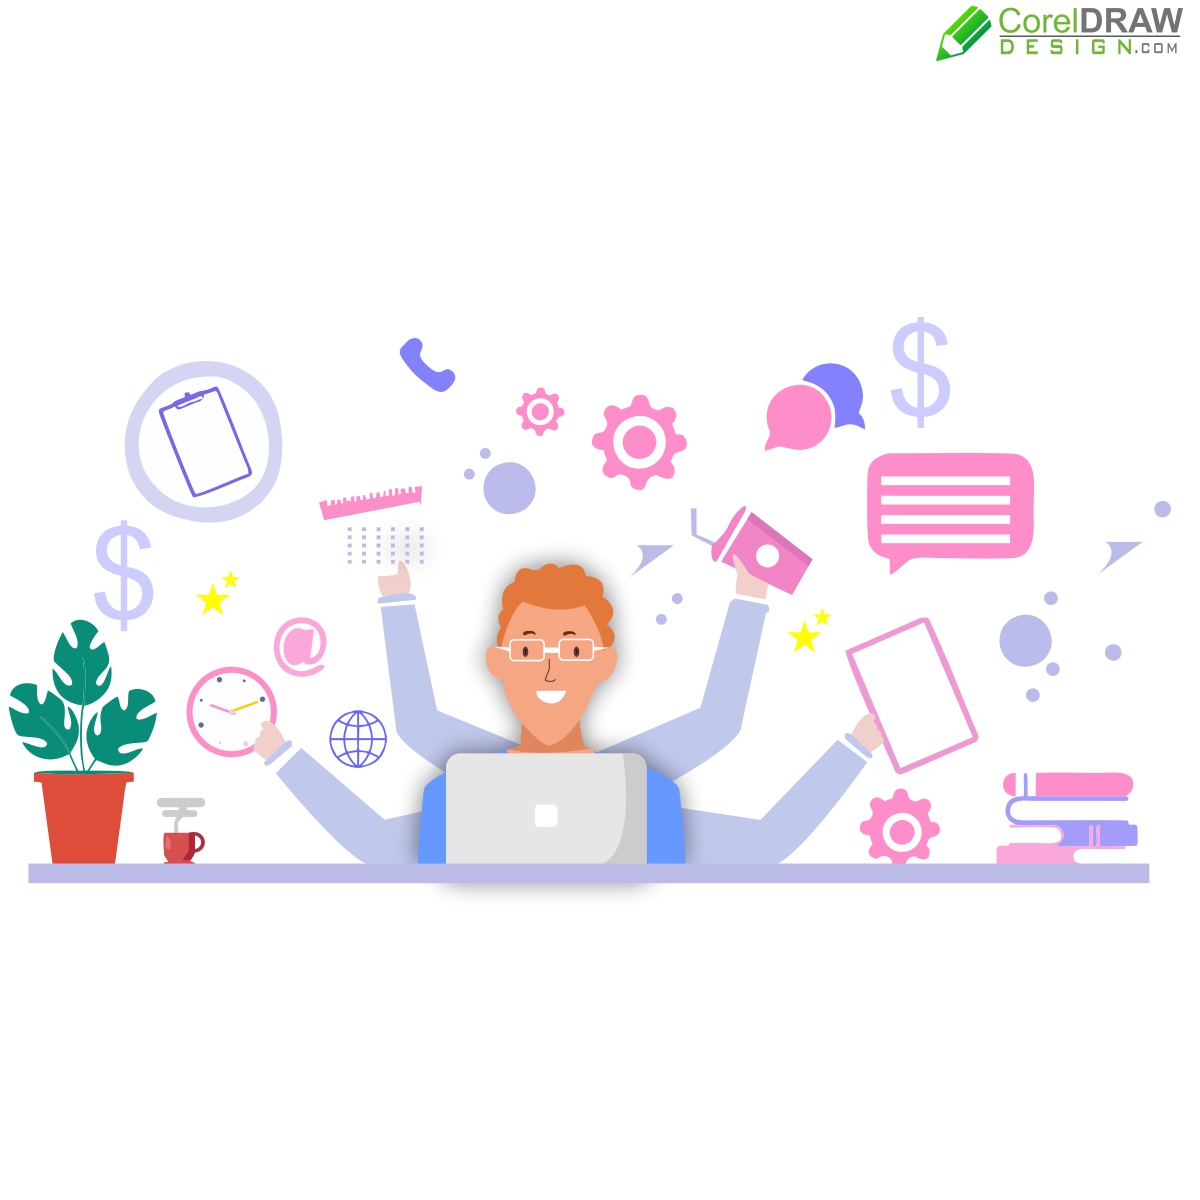 Multitasking Business men Or Office Worker as Secretary Surrounded By Hands With Holding Every Job In The Workplace. Vector